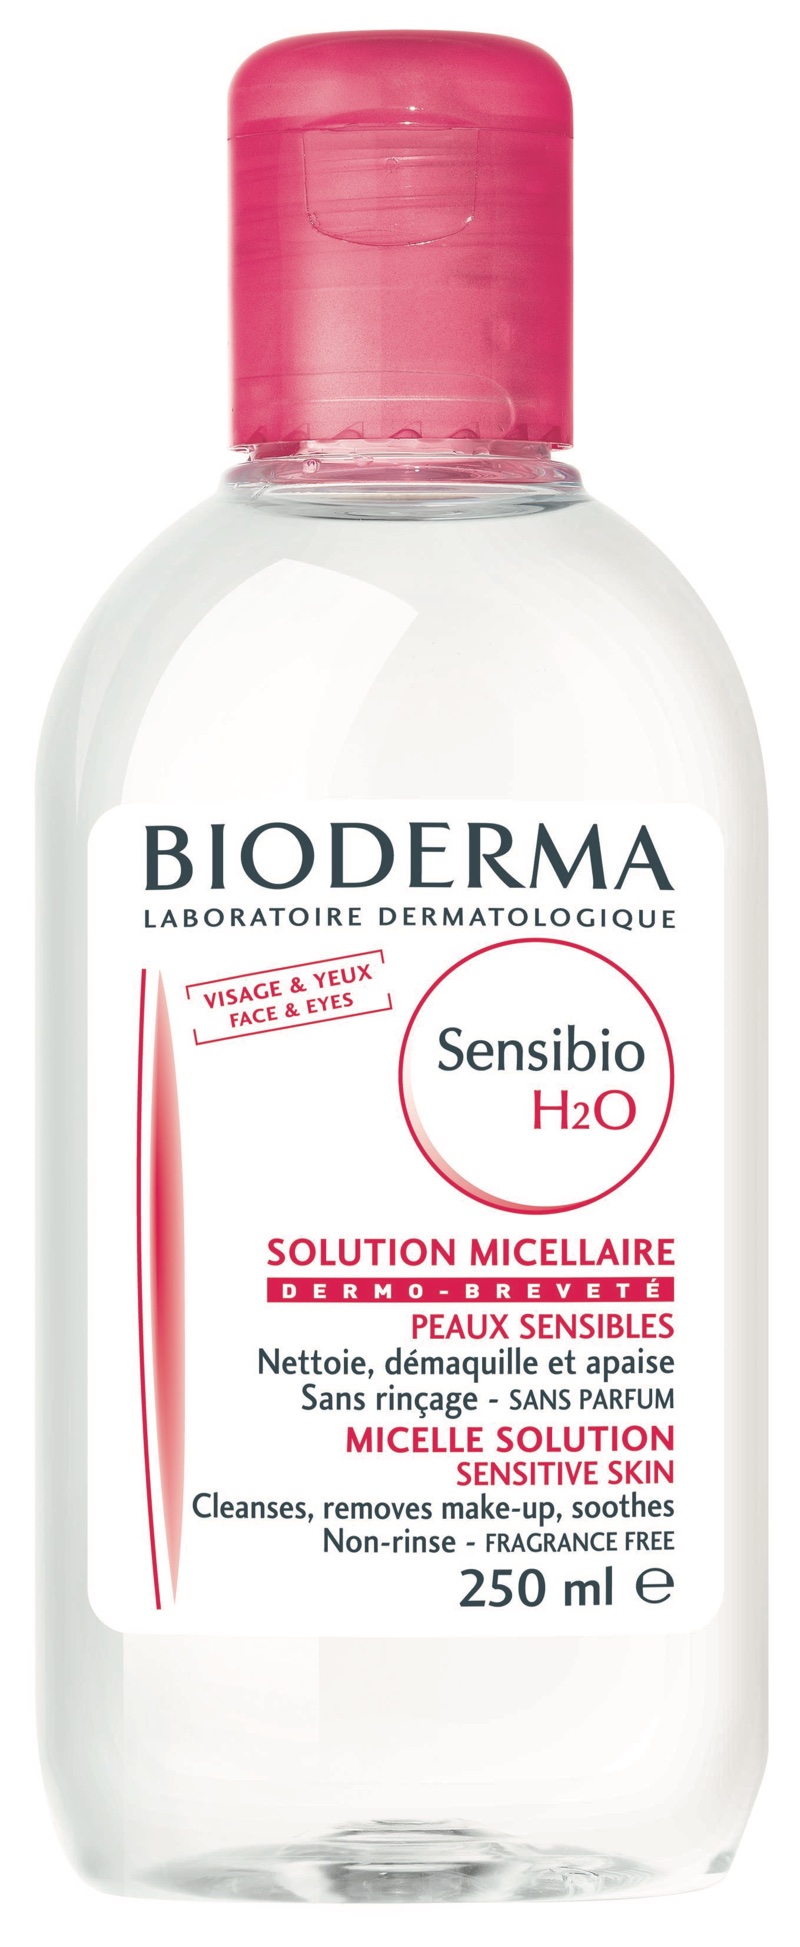 The product in question is Bioderma's Sensibio H2O Micellar Water